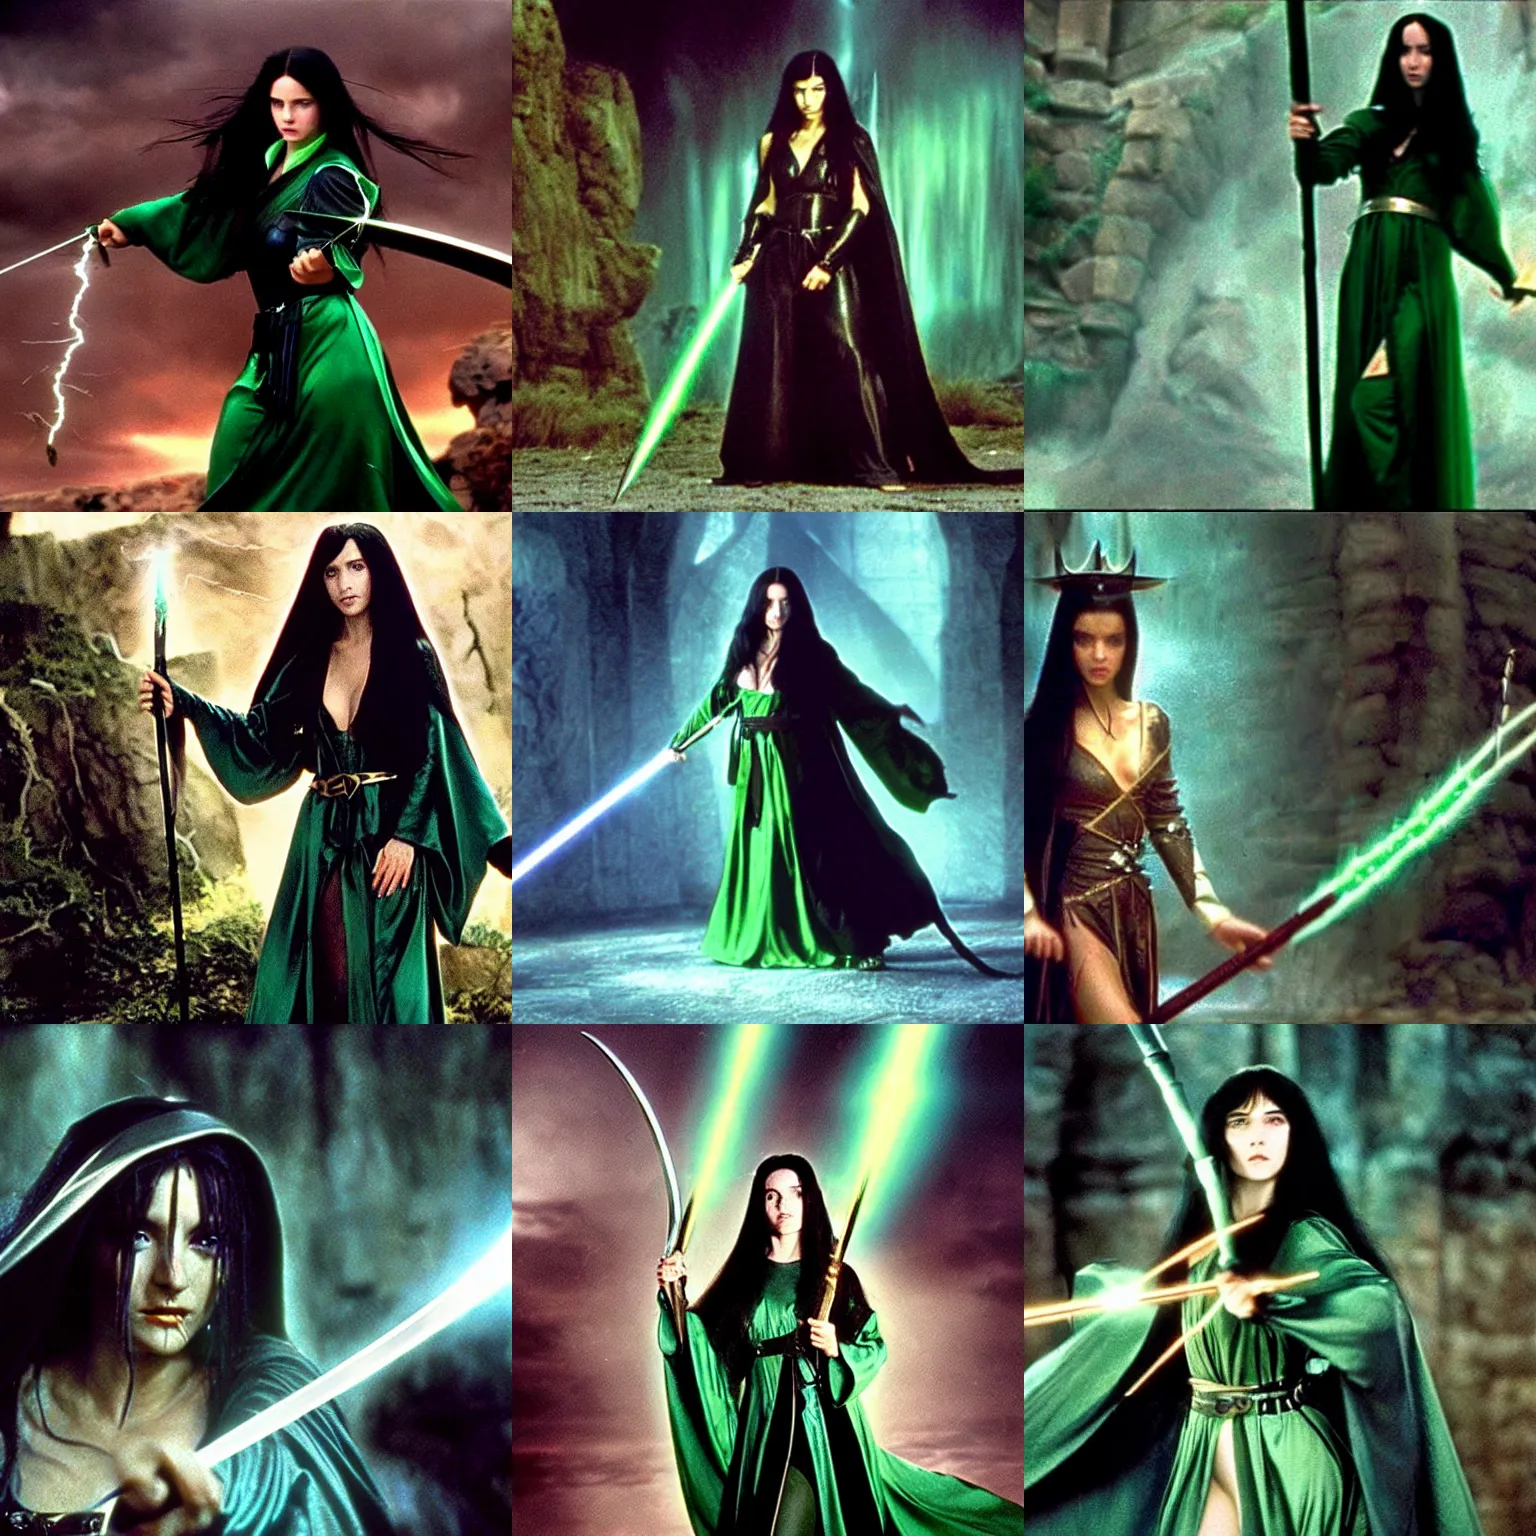 Prompt: epic photo of young beautiful medieval sorceress with very long black hair wearing a green satin robe and metal belt, battle scene, holding her wizard staff electricity emanating from it, sweaty, in the film excalibur 1 9 8 0, movie still, cinematography by david fincher